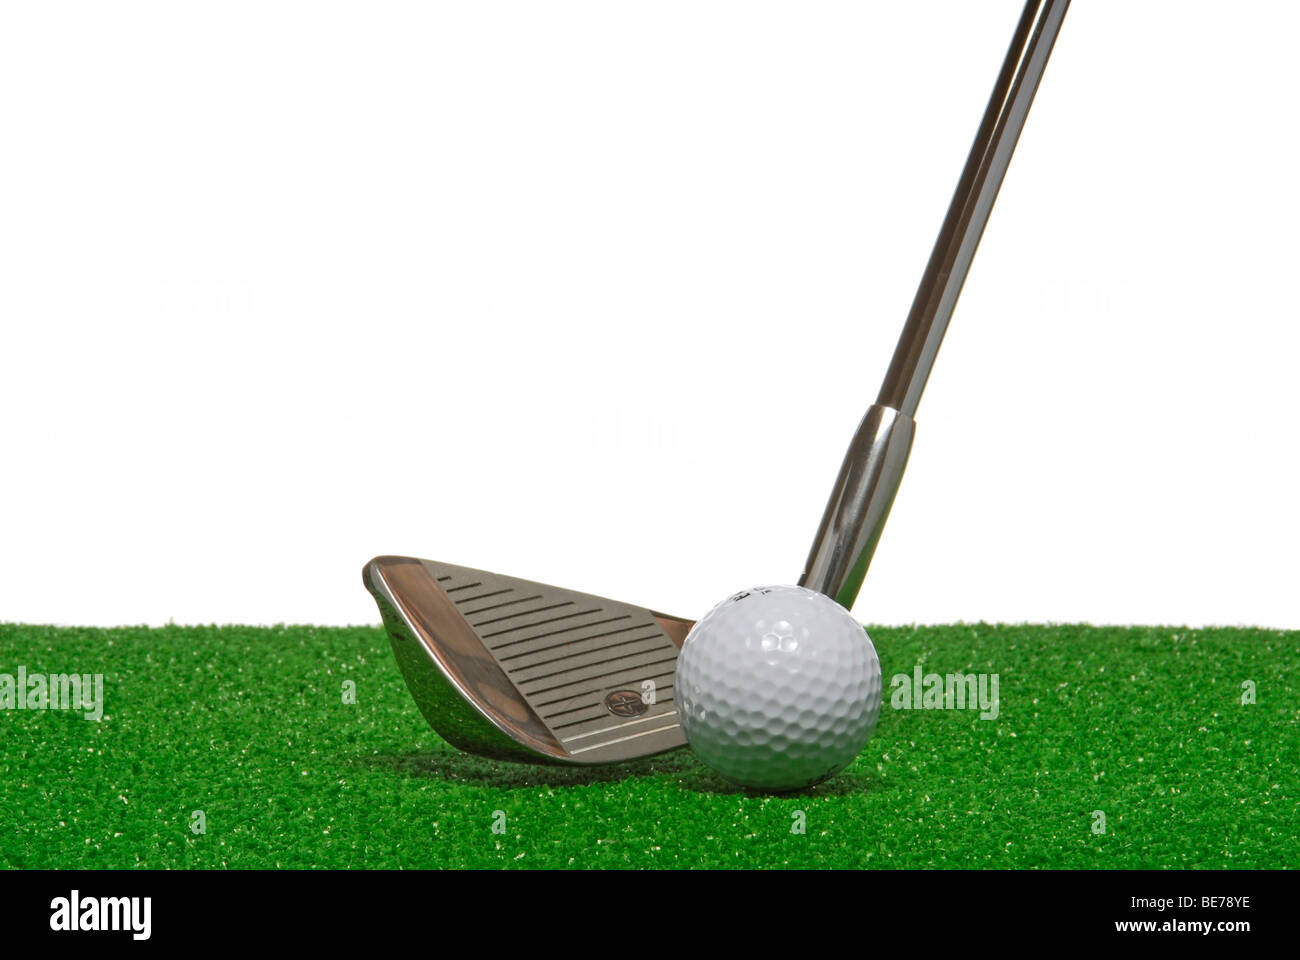 Golf club and ball on artificial turf Stock Photo